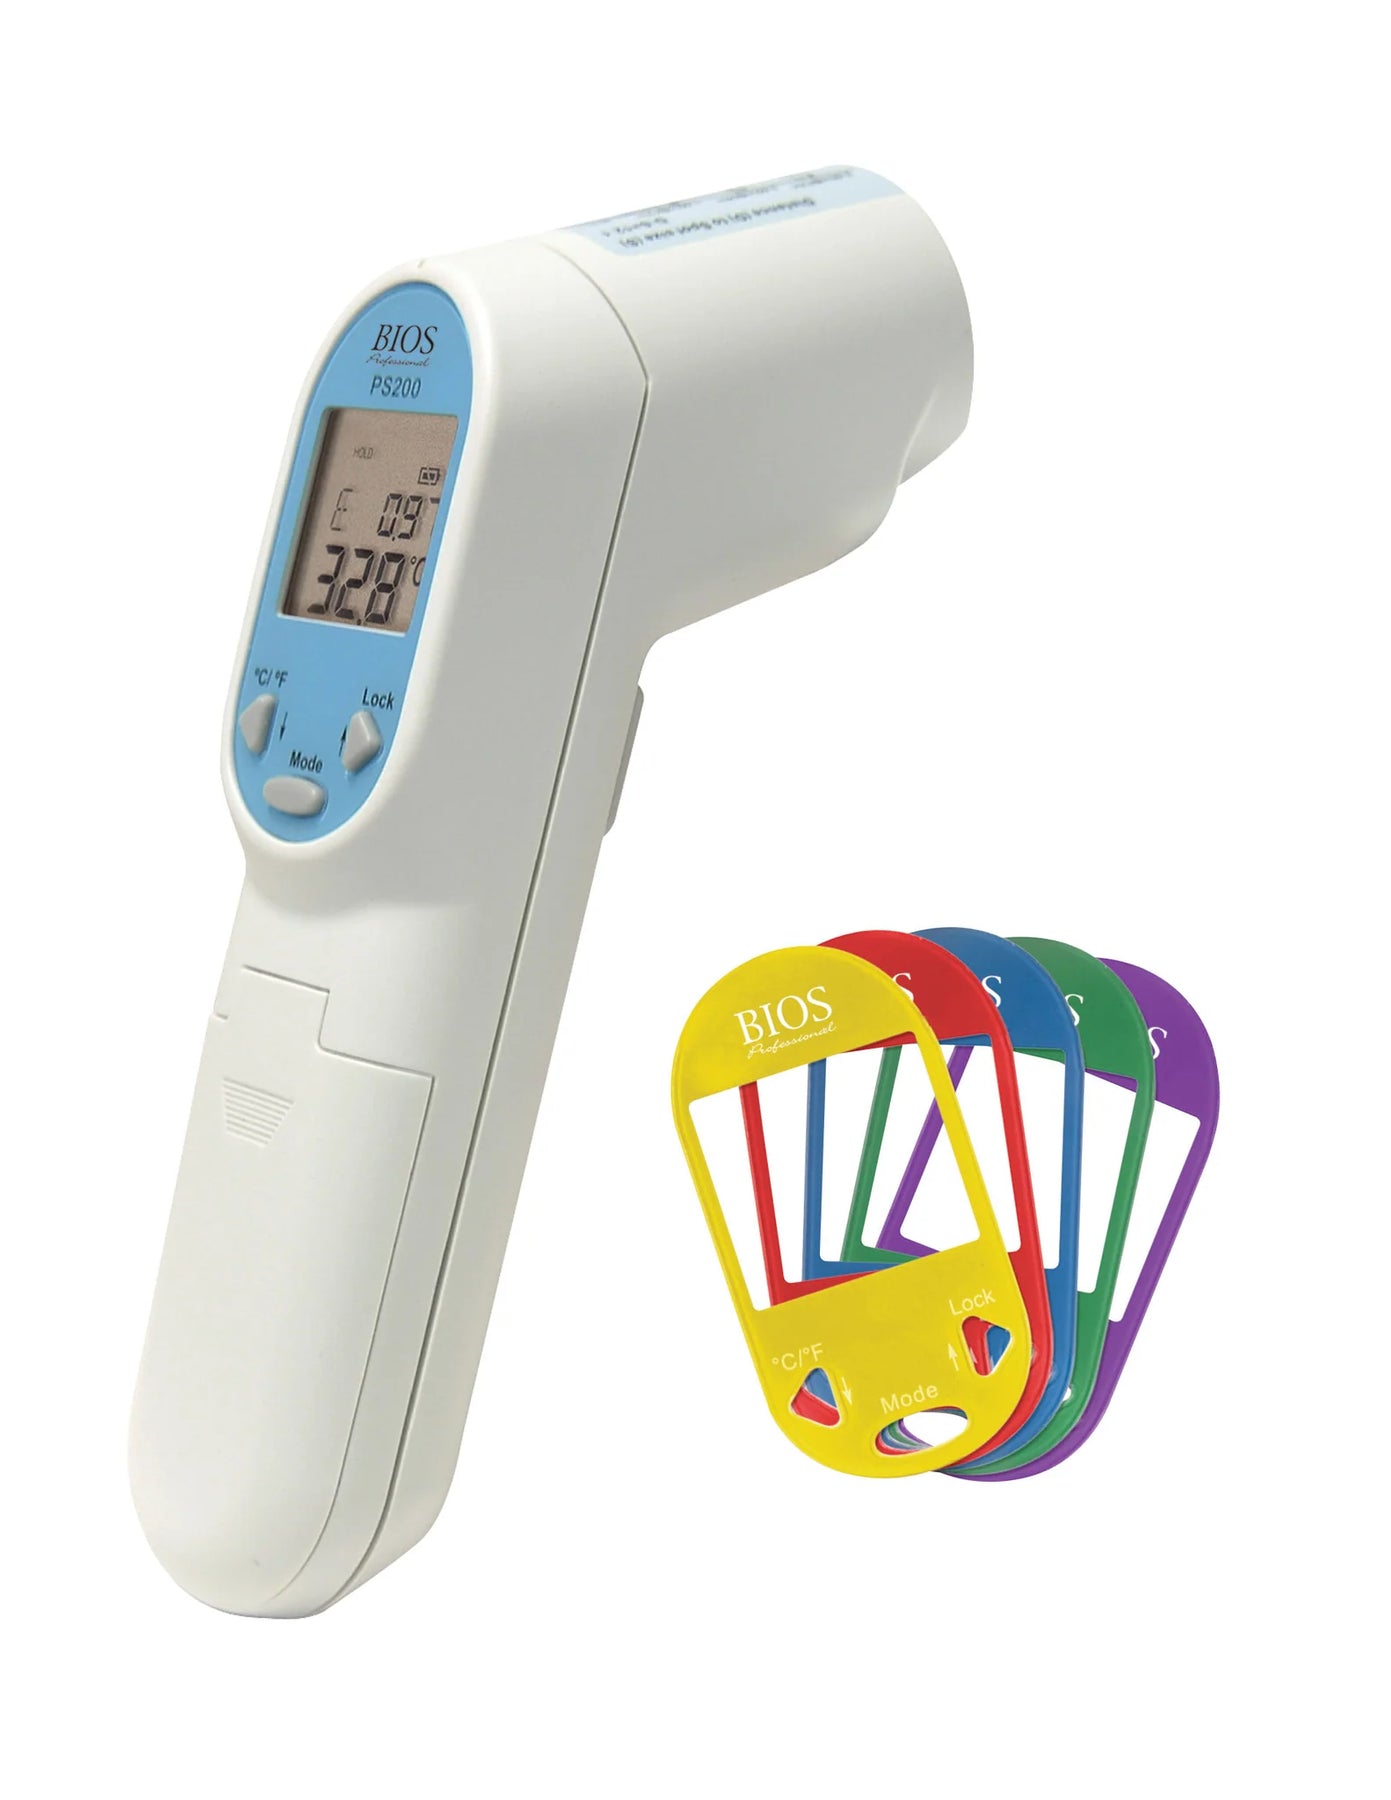 Thermor PRO FOOD SAFE THERMOMETER PS200